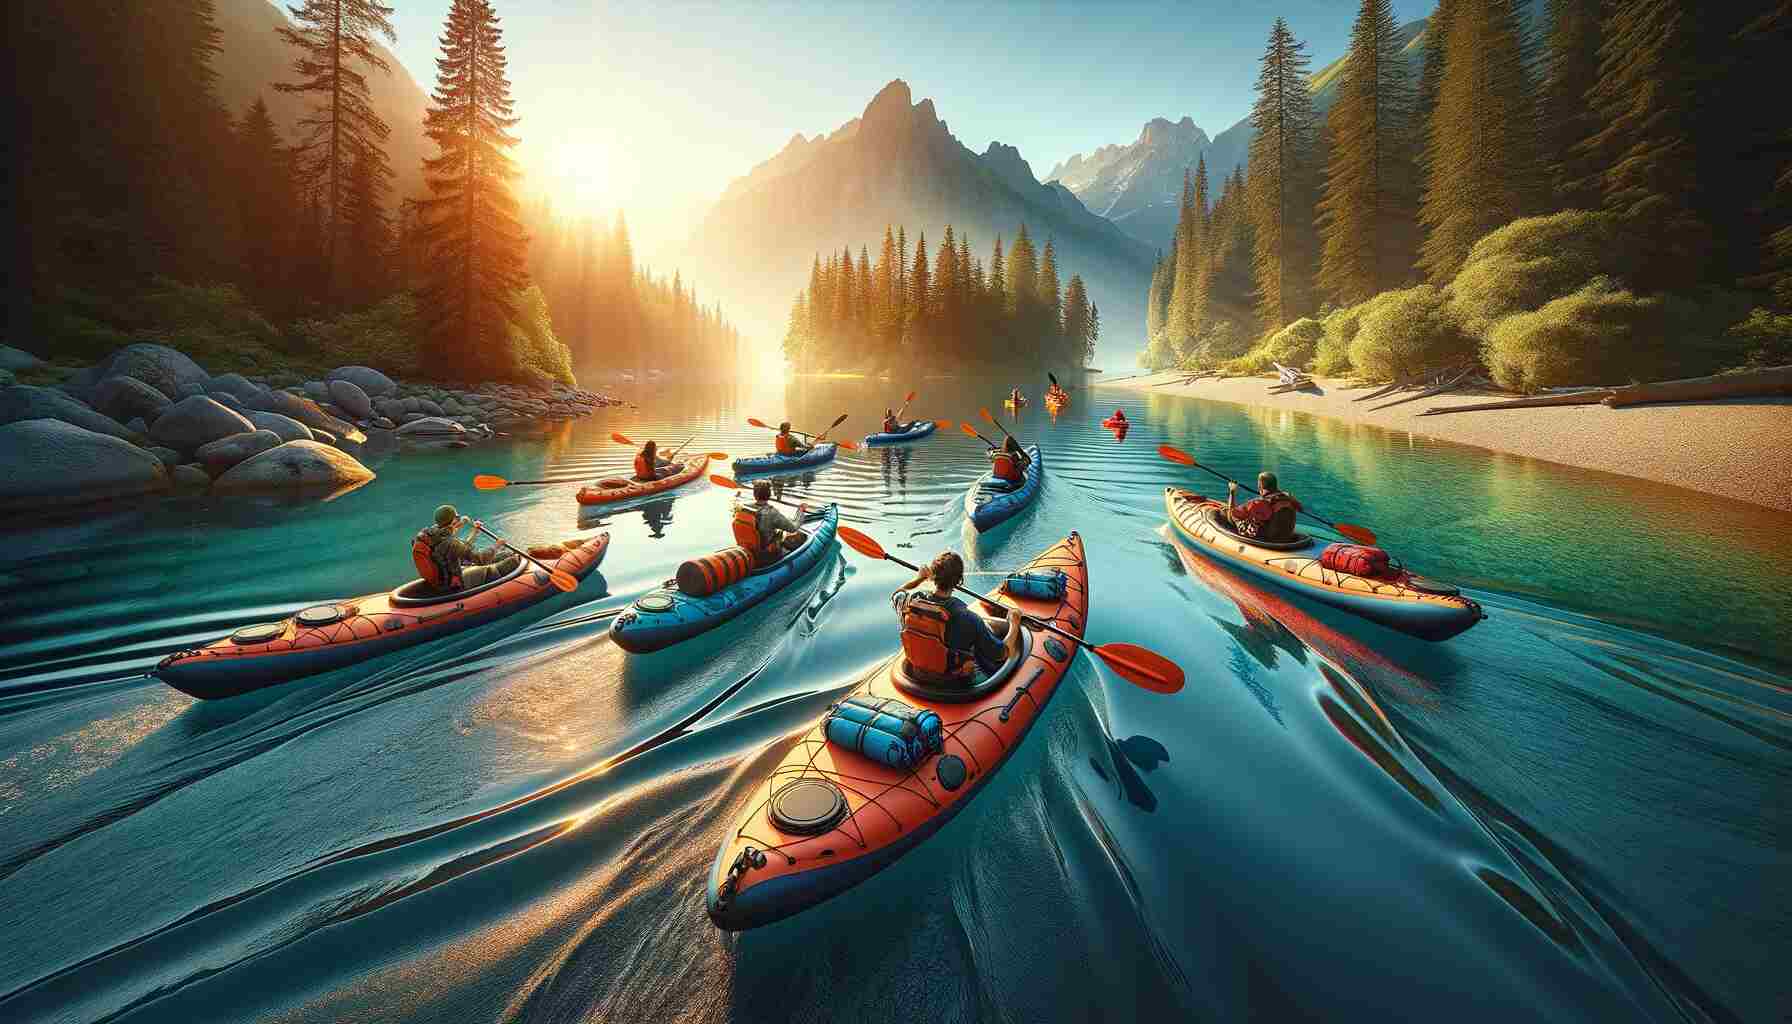 Here is the featured image for tAre Inflatable Kayaks Any Good? This image visually represents the diverse range of inflatable kayaks and the adventurous spirit of kayaking.